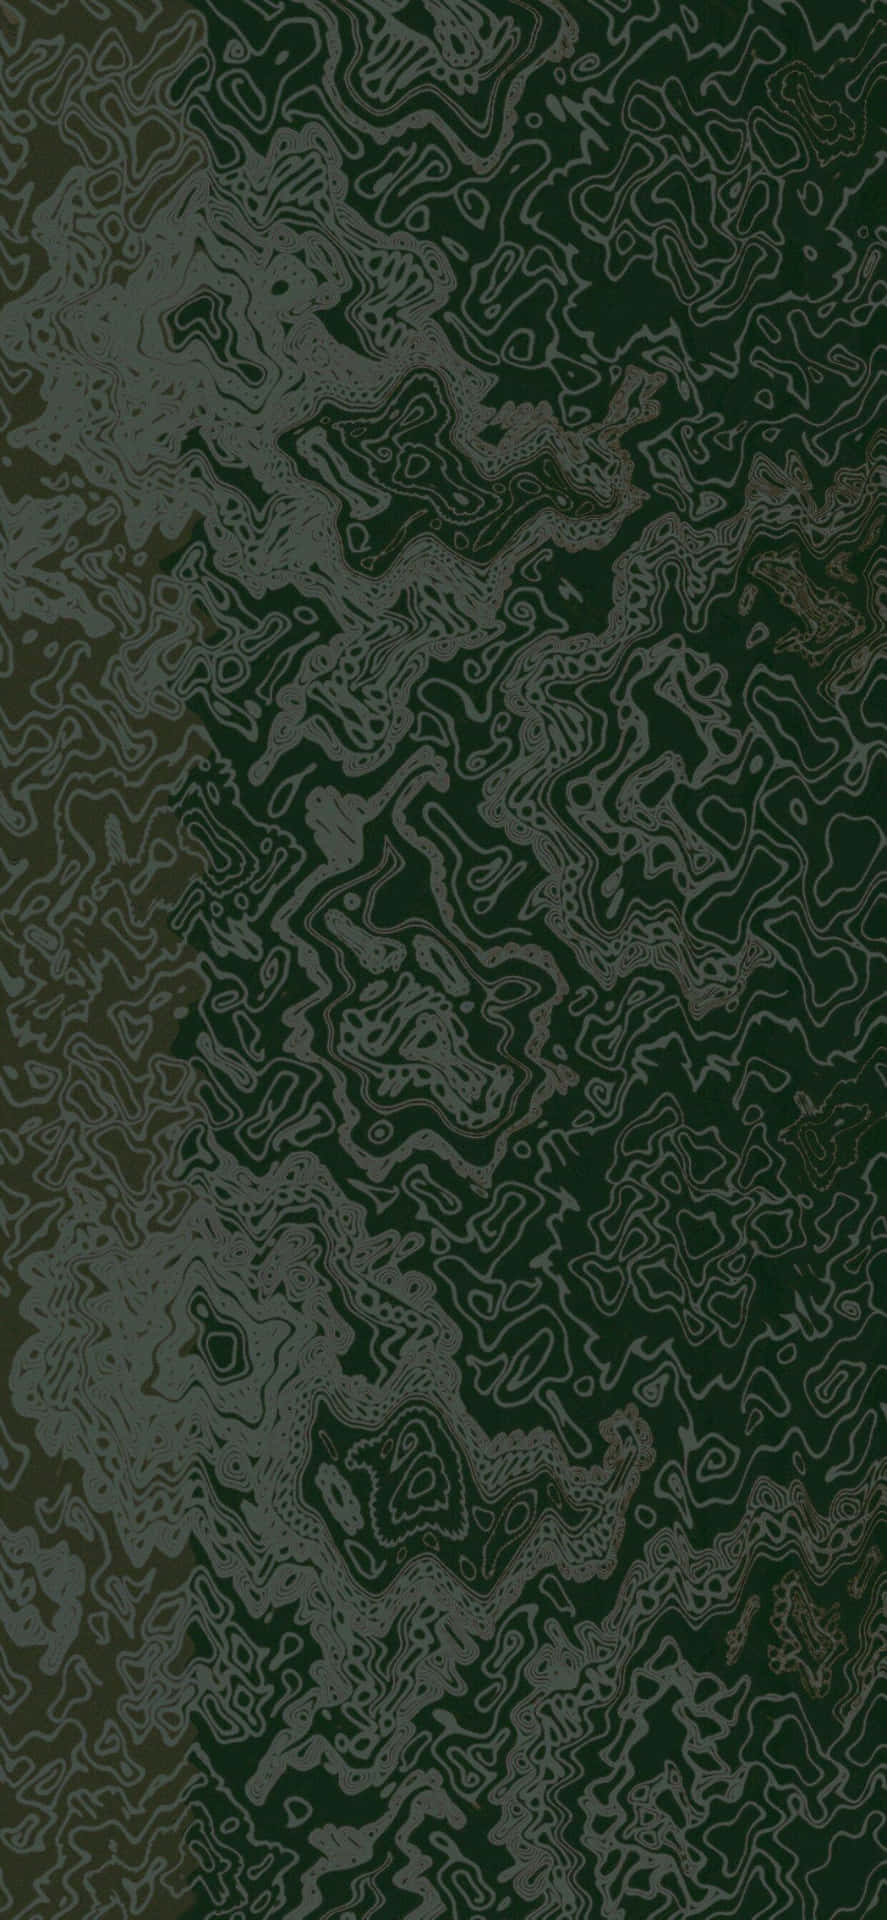 A Black And Green Wallpaper With Swirls Wallpaper